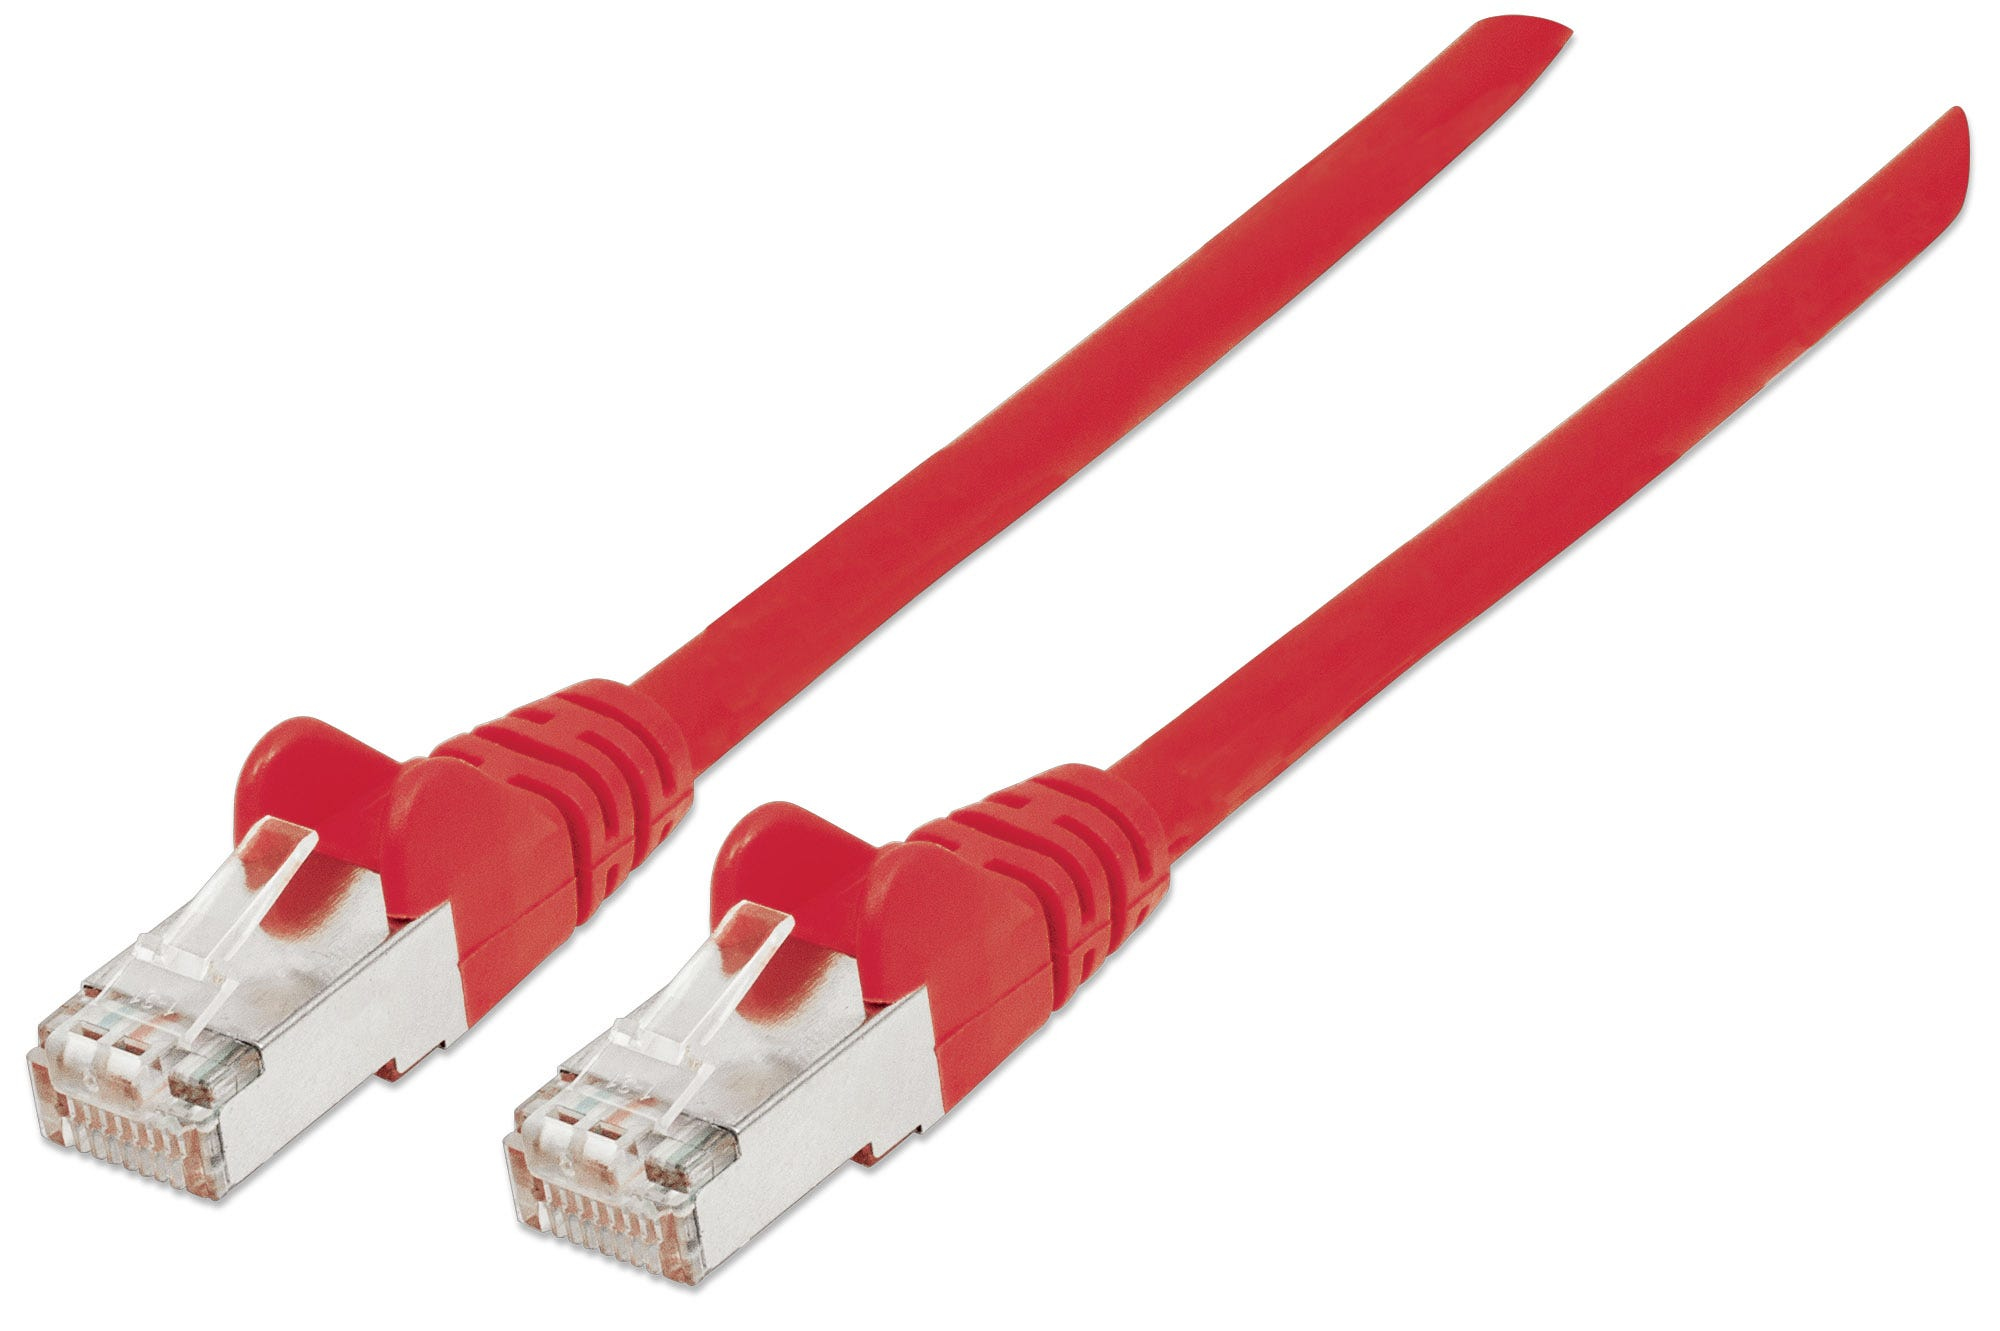 Photos - Cable (video, audio, USB) INTELLINET Network Patch Cable, Cat6, 1m, Red, Copper, S/FTP, LSOH / L 736 